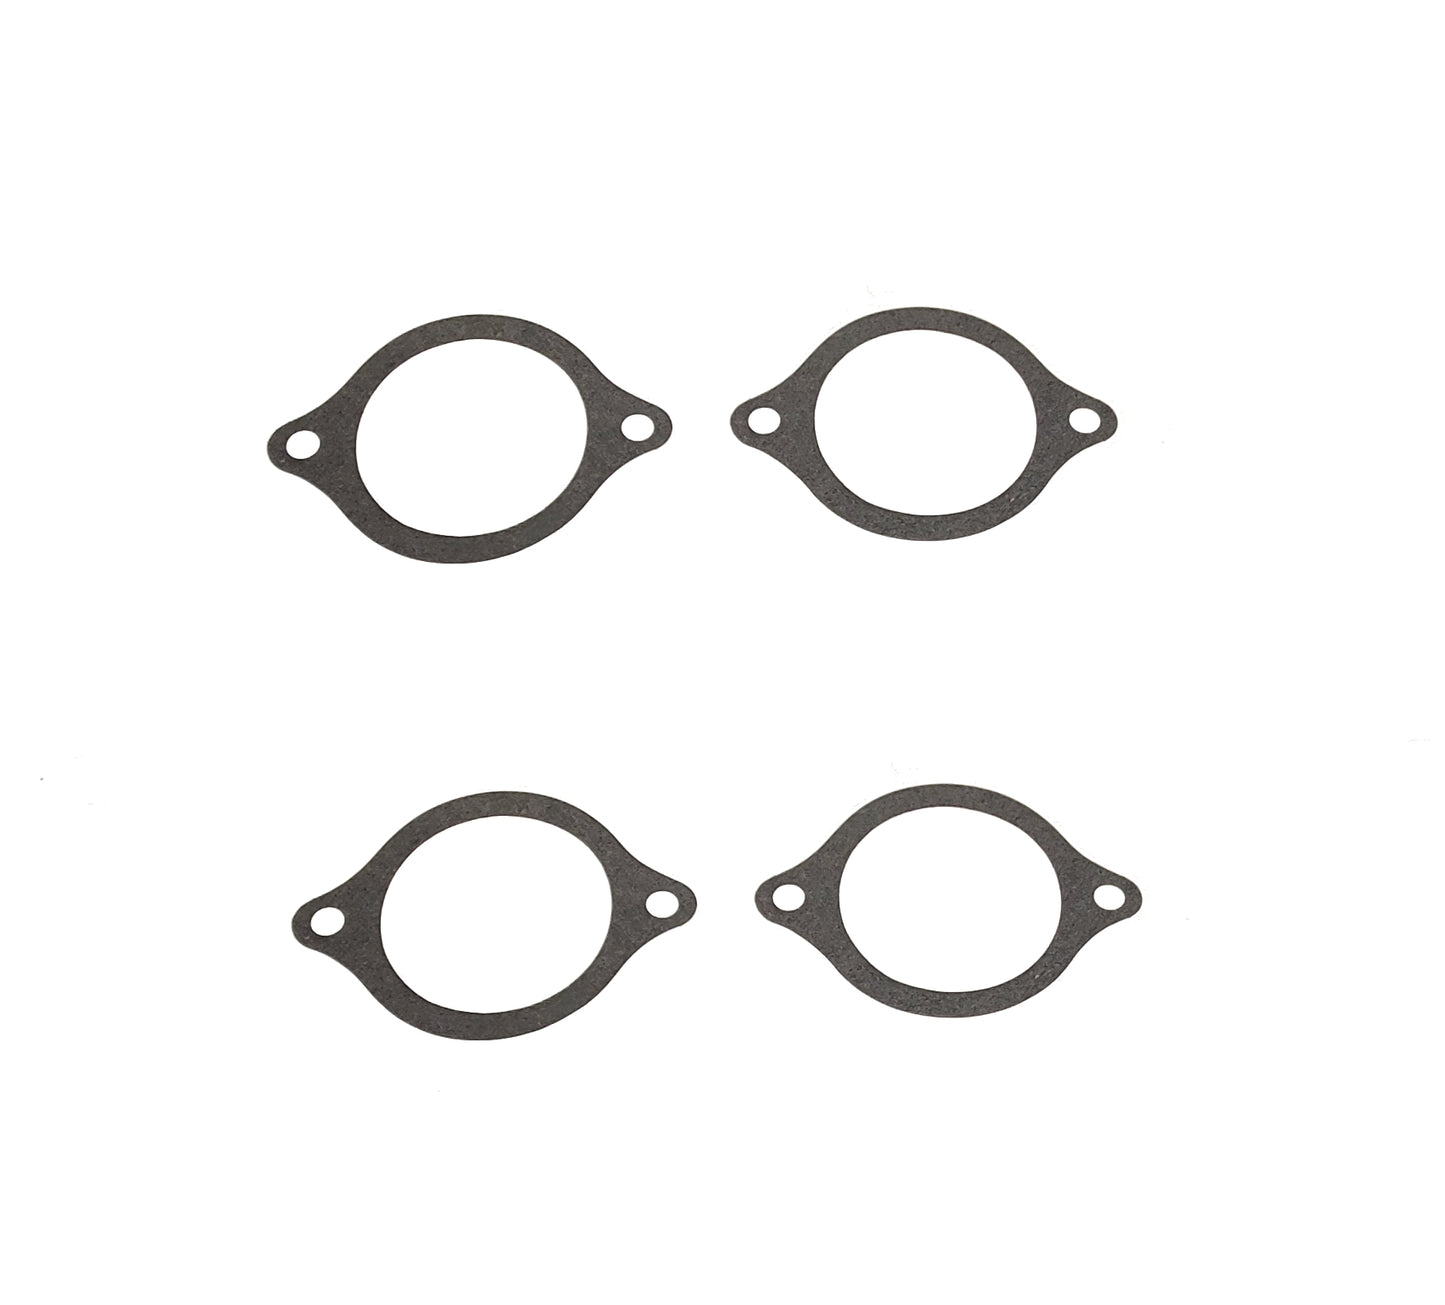 Replacement Governor Housing Gasket for Ford #9N6022 Fits 2N 8N 9N (QTY of 4)